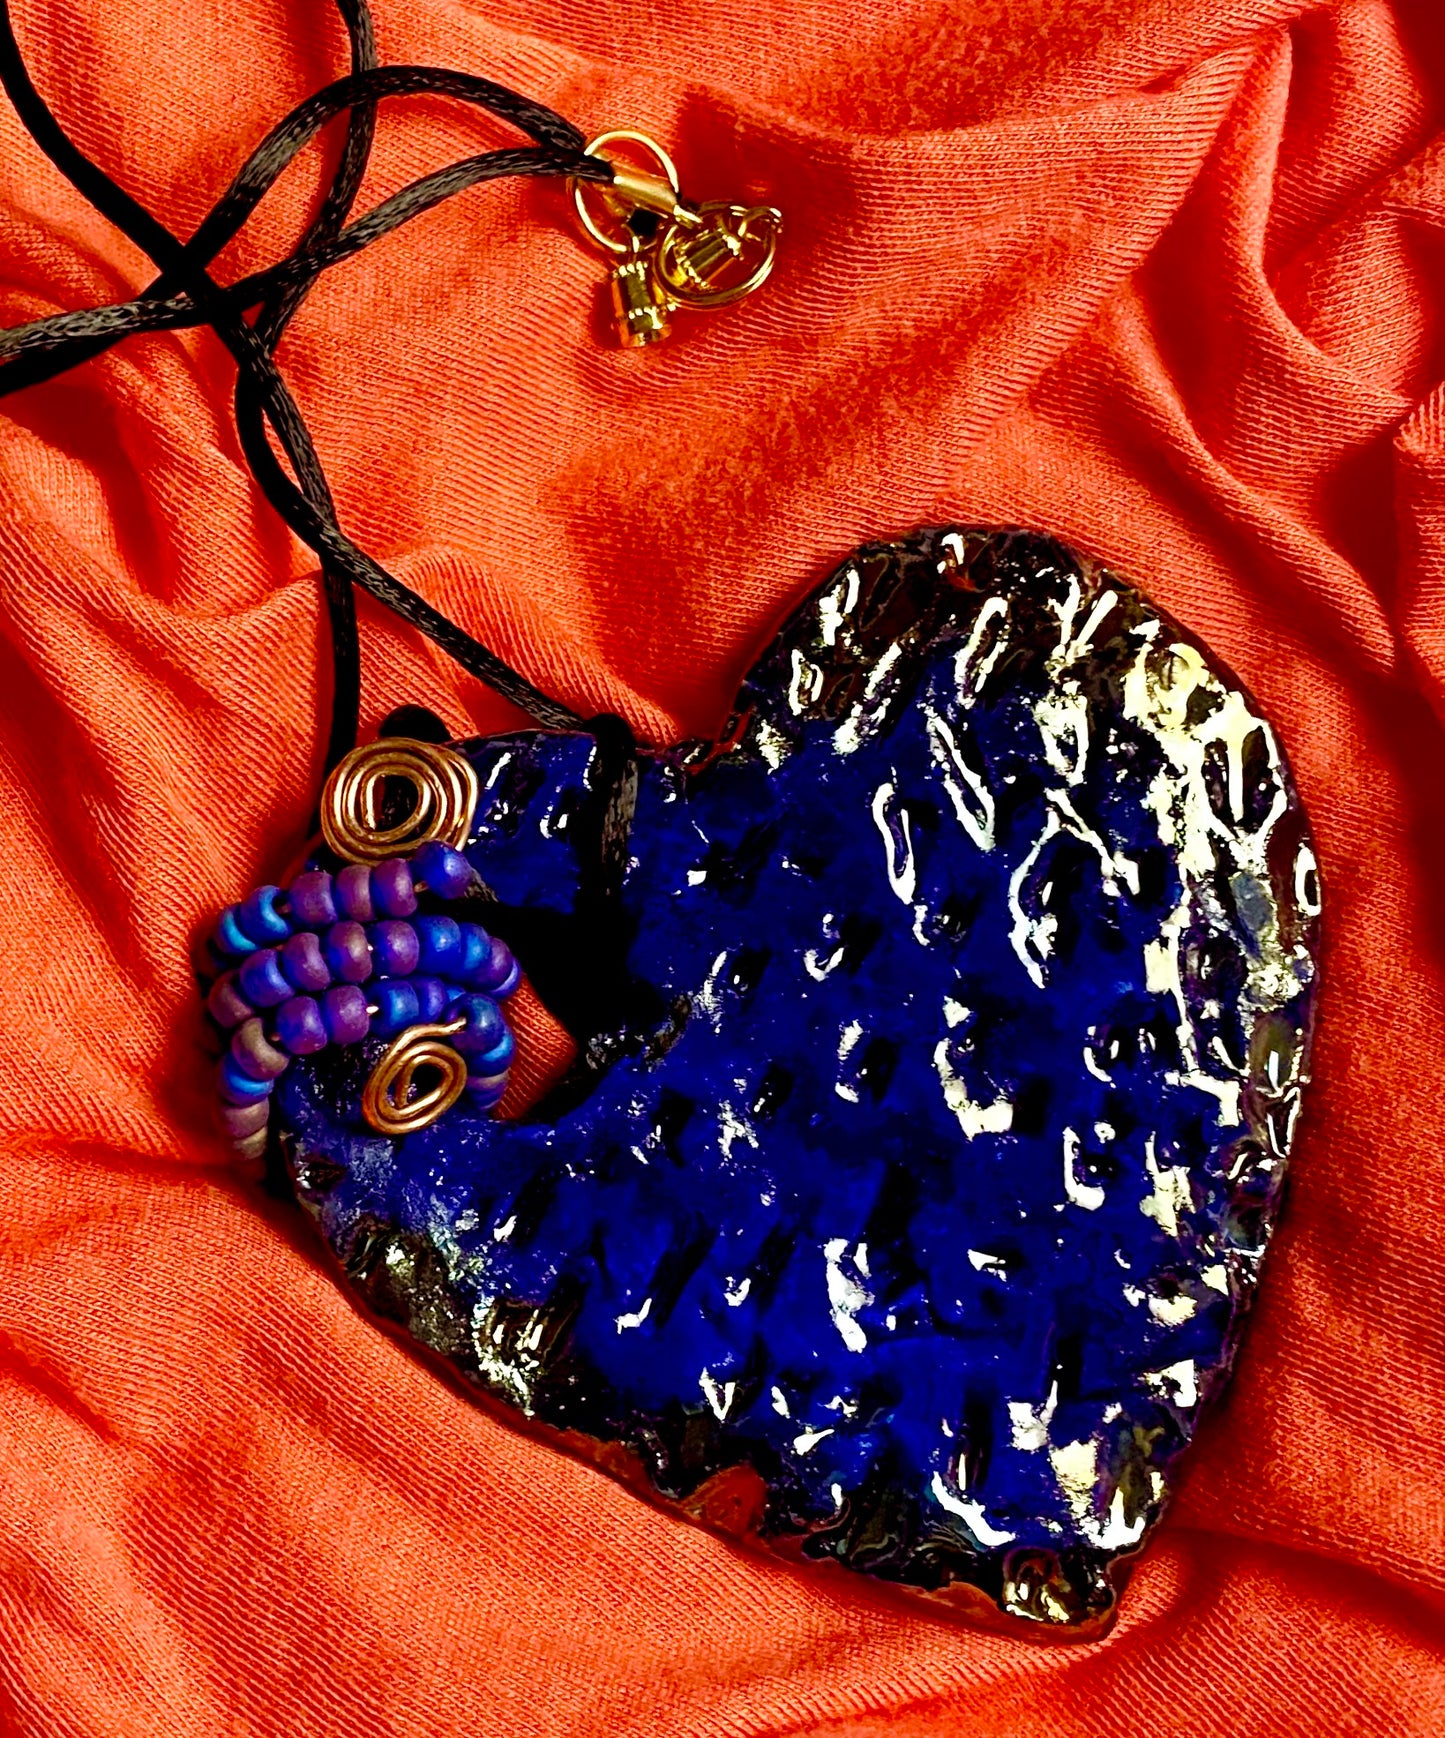  Have A Heart ! Each heart pendant is handmade with love! It is 3"x 3" and weighs approx. 3ozs. This pendant has a royal blue and gold metallic raku glazes that renders a unique translucent  patina. The heart  has a textured  pattern. It holds a spiral of off blue violet mini beads on a spiral copper wire. This pendant has a nice 12" black suede cord!